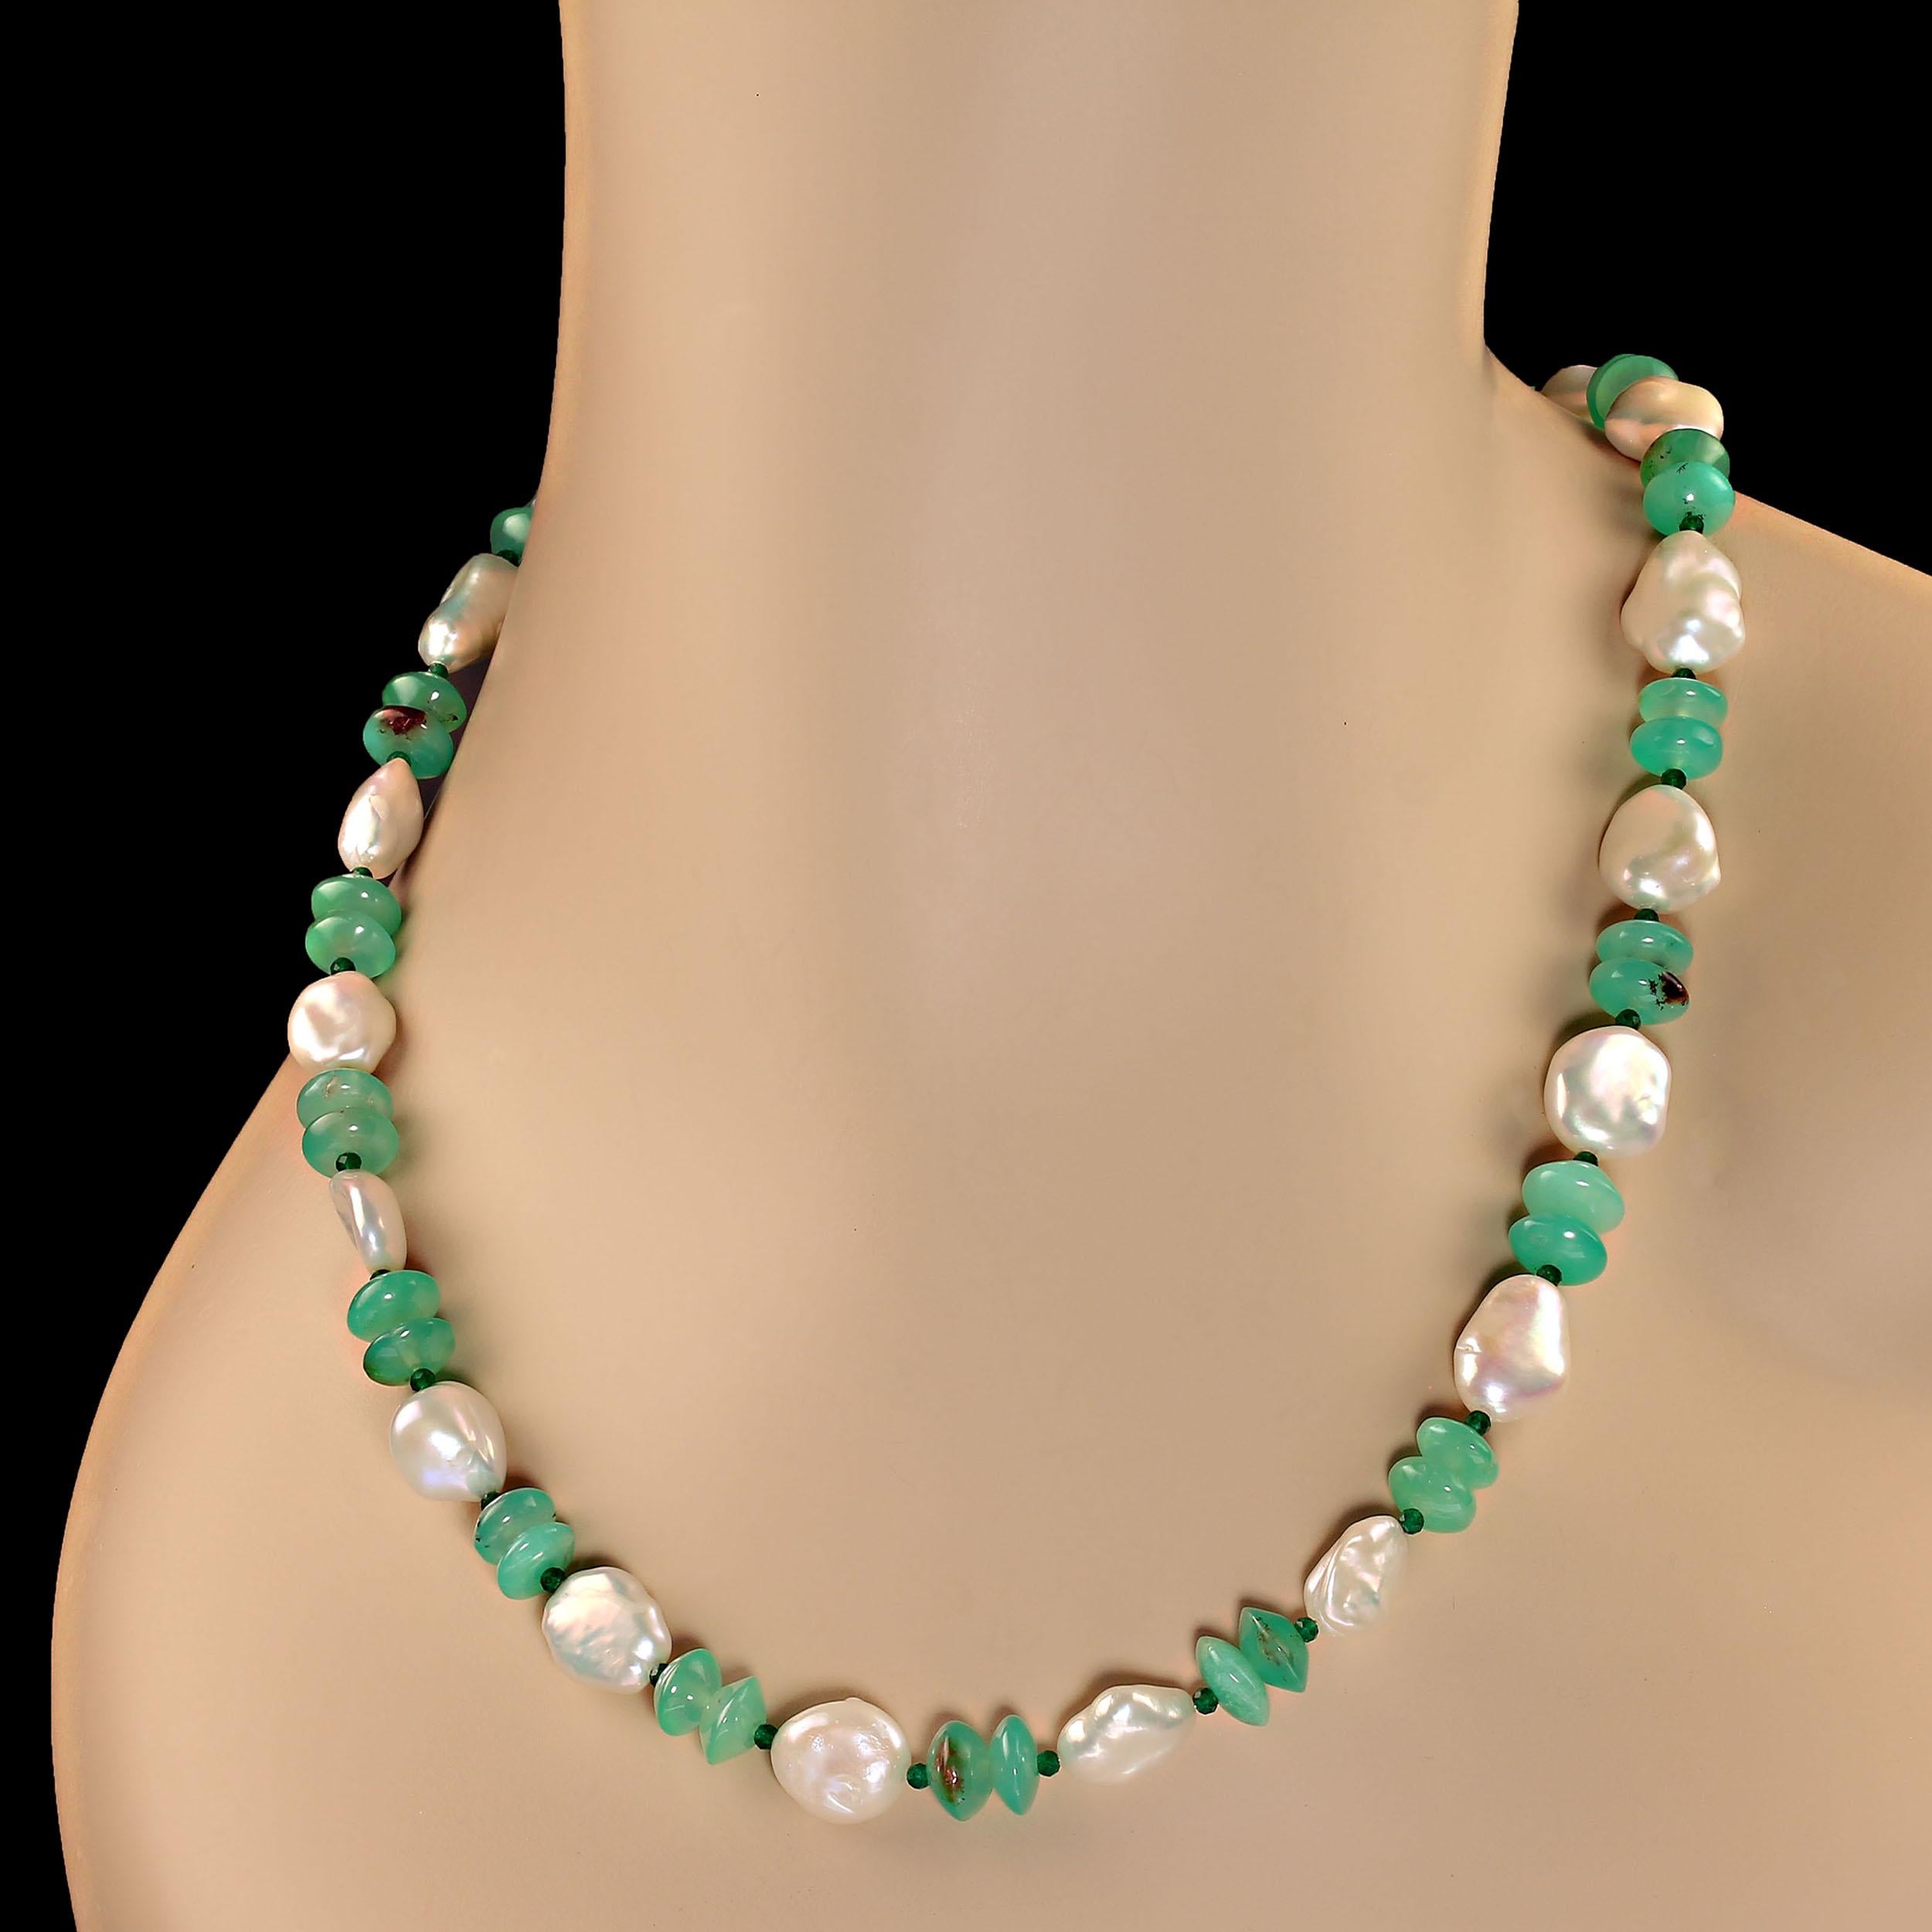 Bead AJD 24 Inch Glowing Green Chrysoprase & White Pearl Necklace  Perfect Gift For Sale